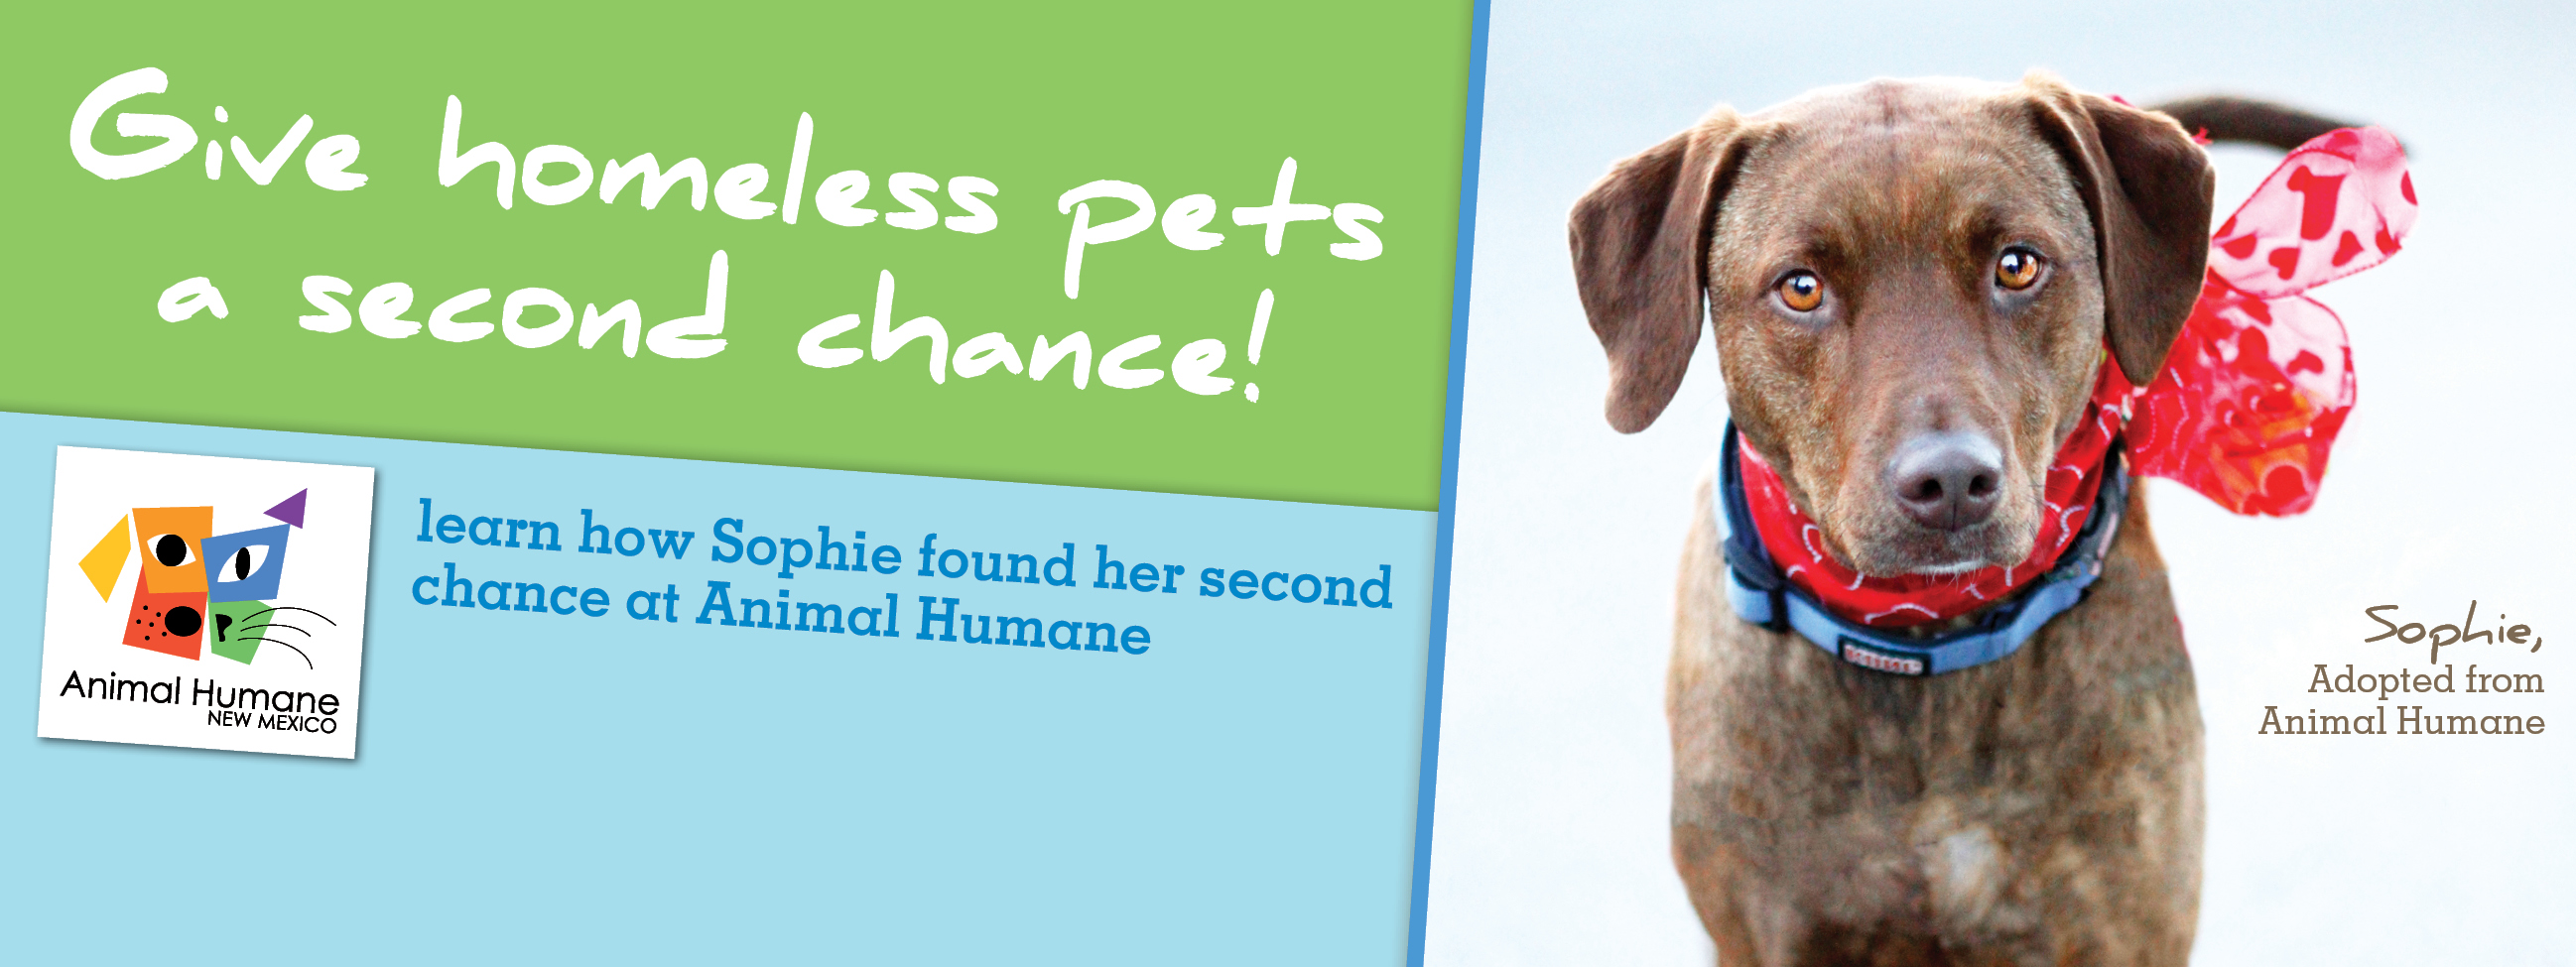 Give homeless pets a second chance!